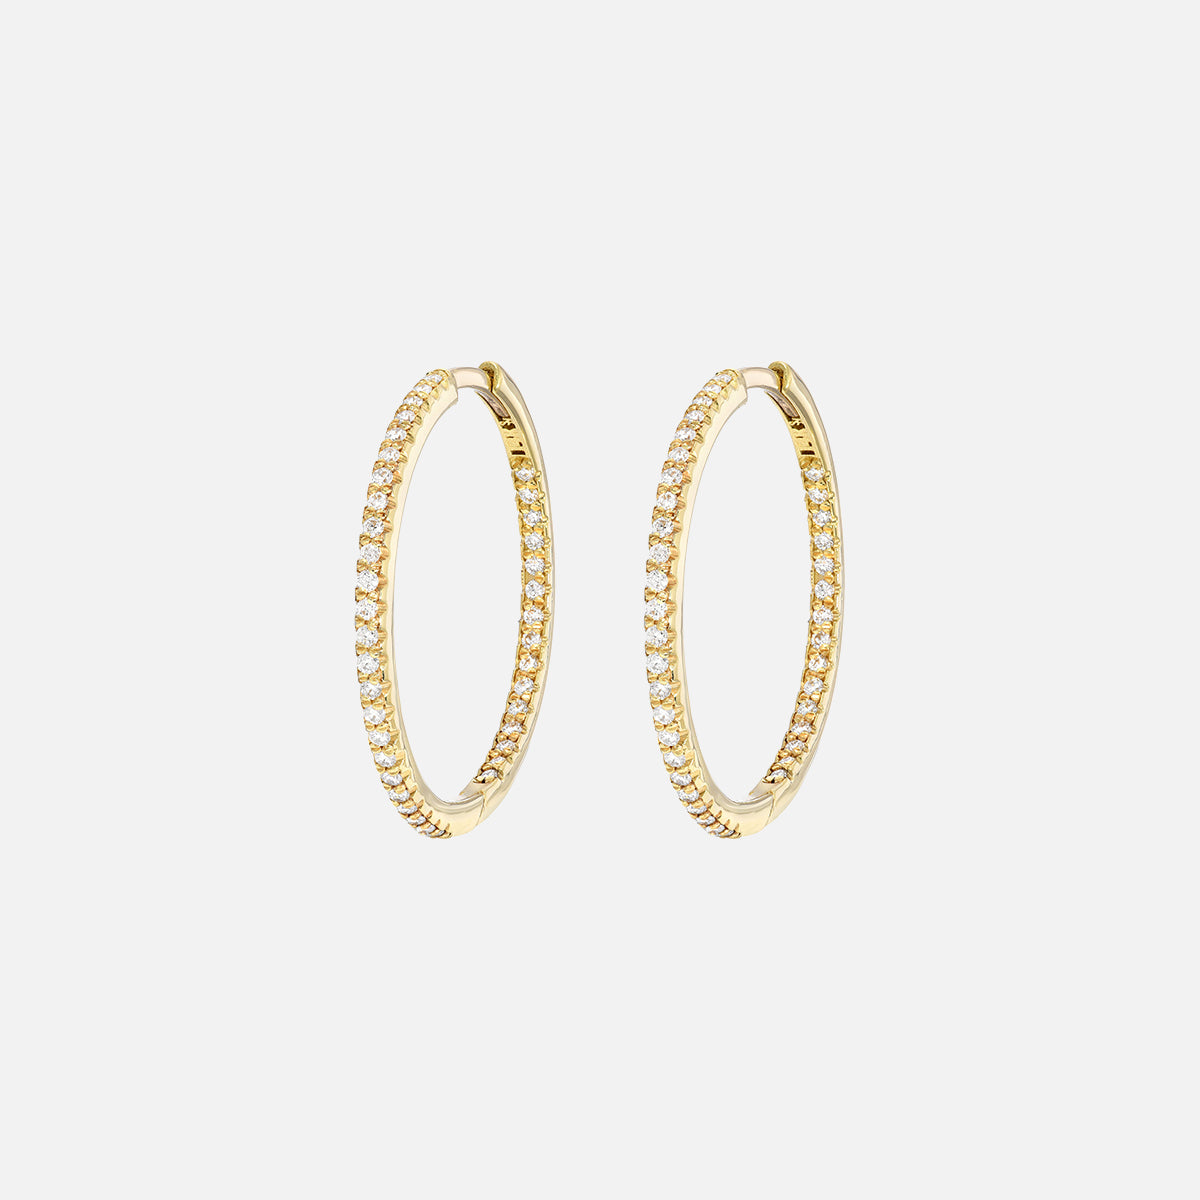 One Inch Diamond Hoops Inside and Out